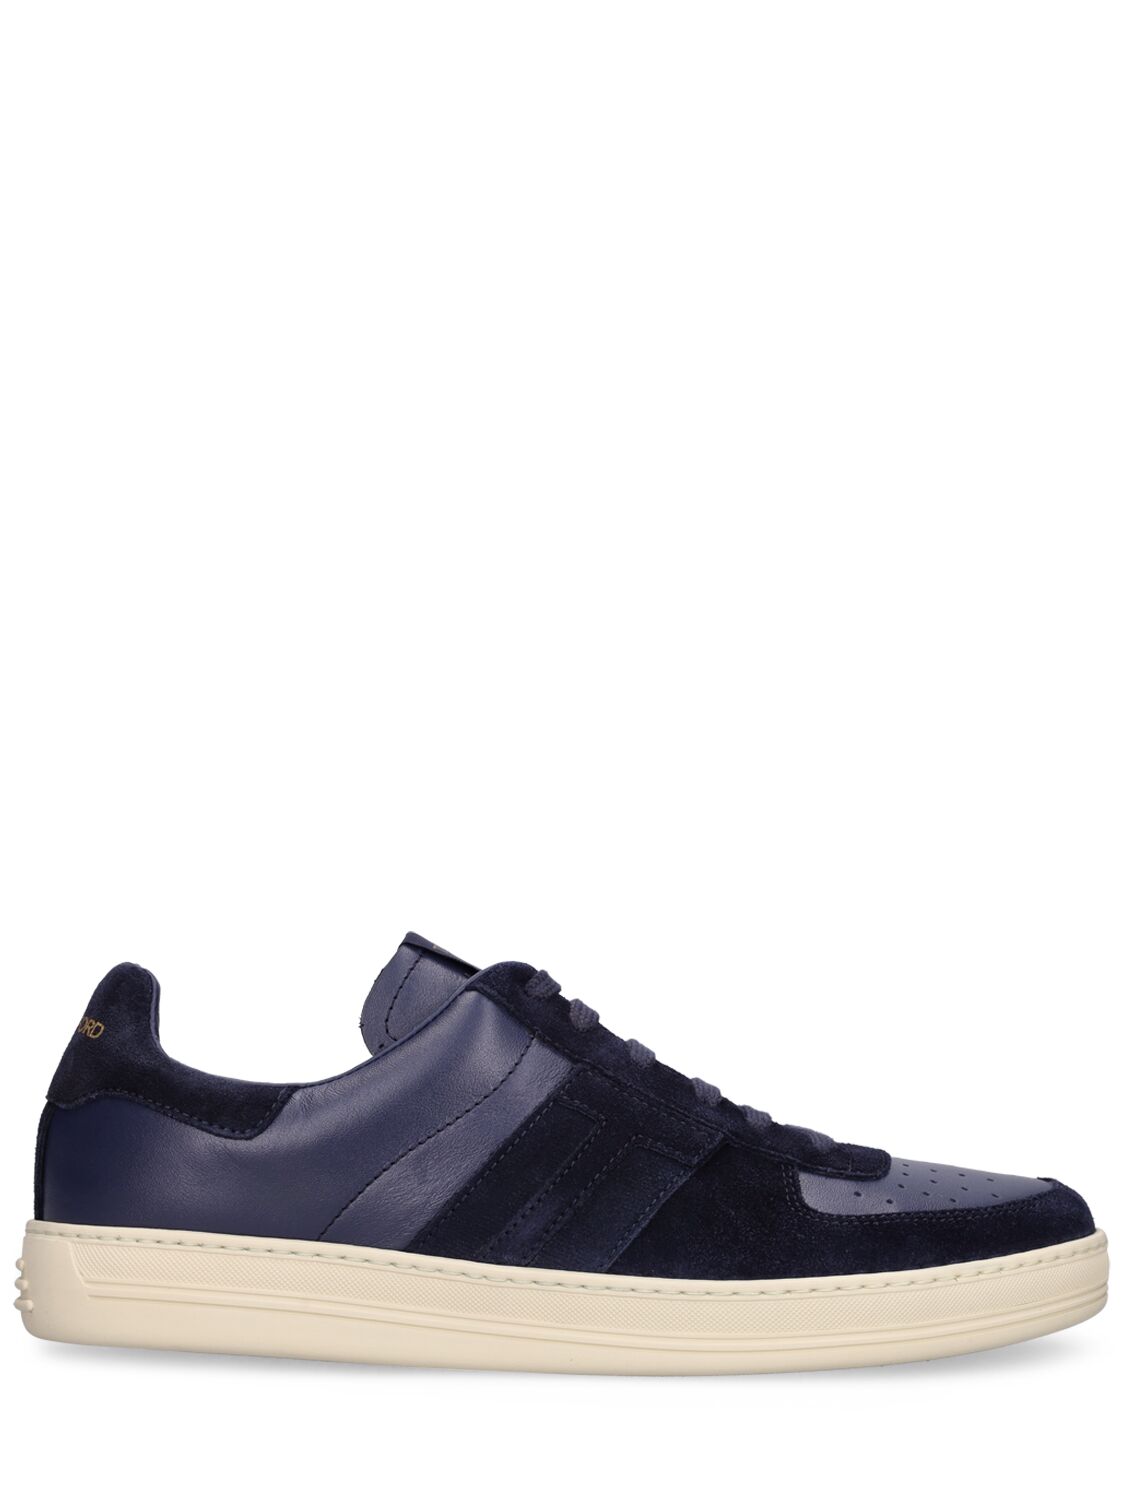 Sneakers Low Top Radcliffe Line - TOM FORD - Modalova